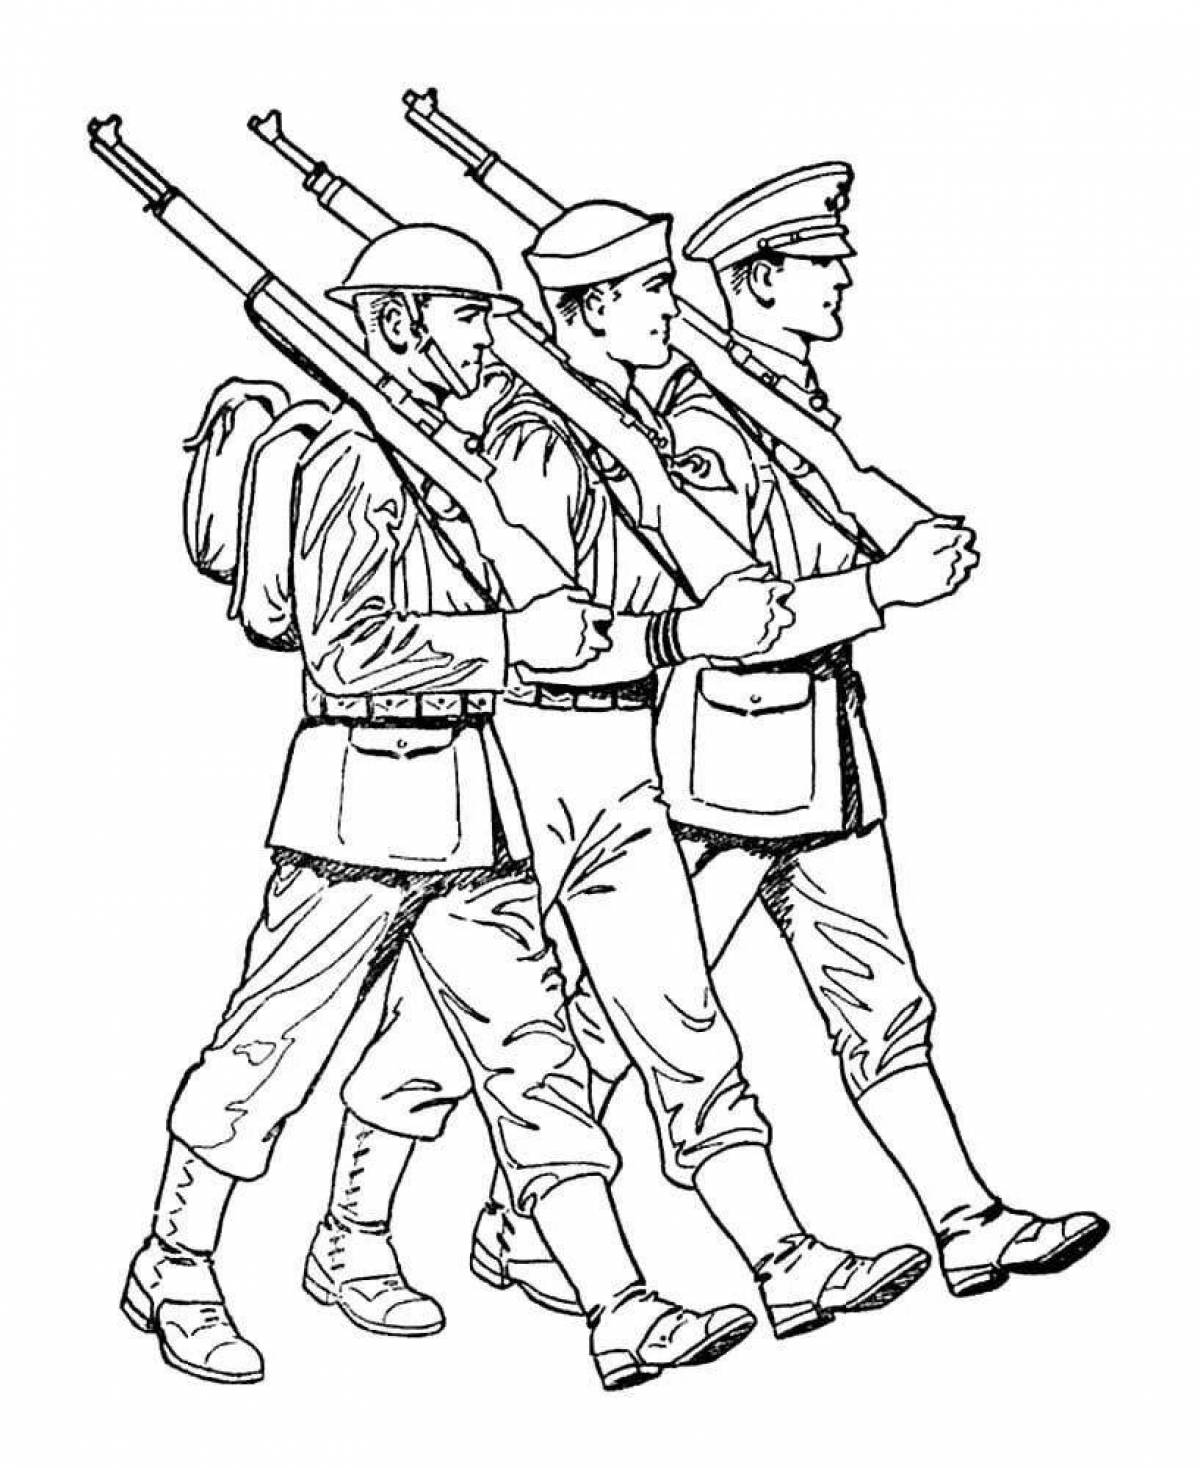 Glorious soldier figurine coloring page